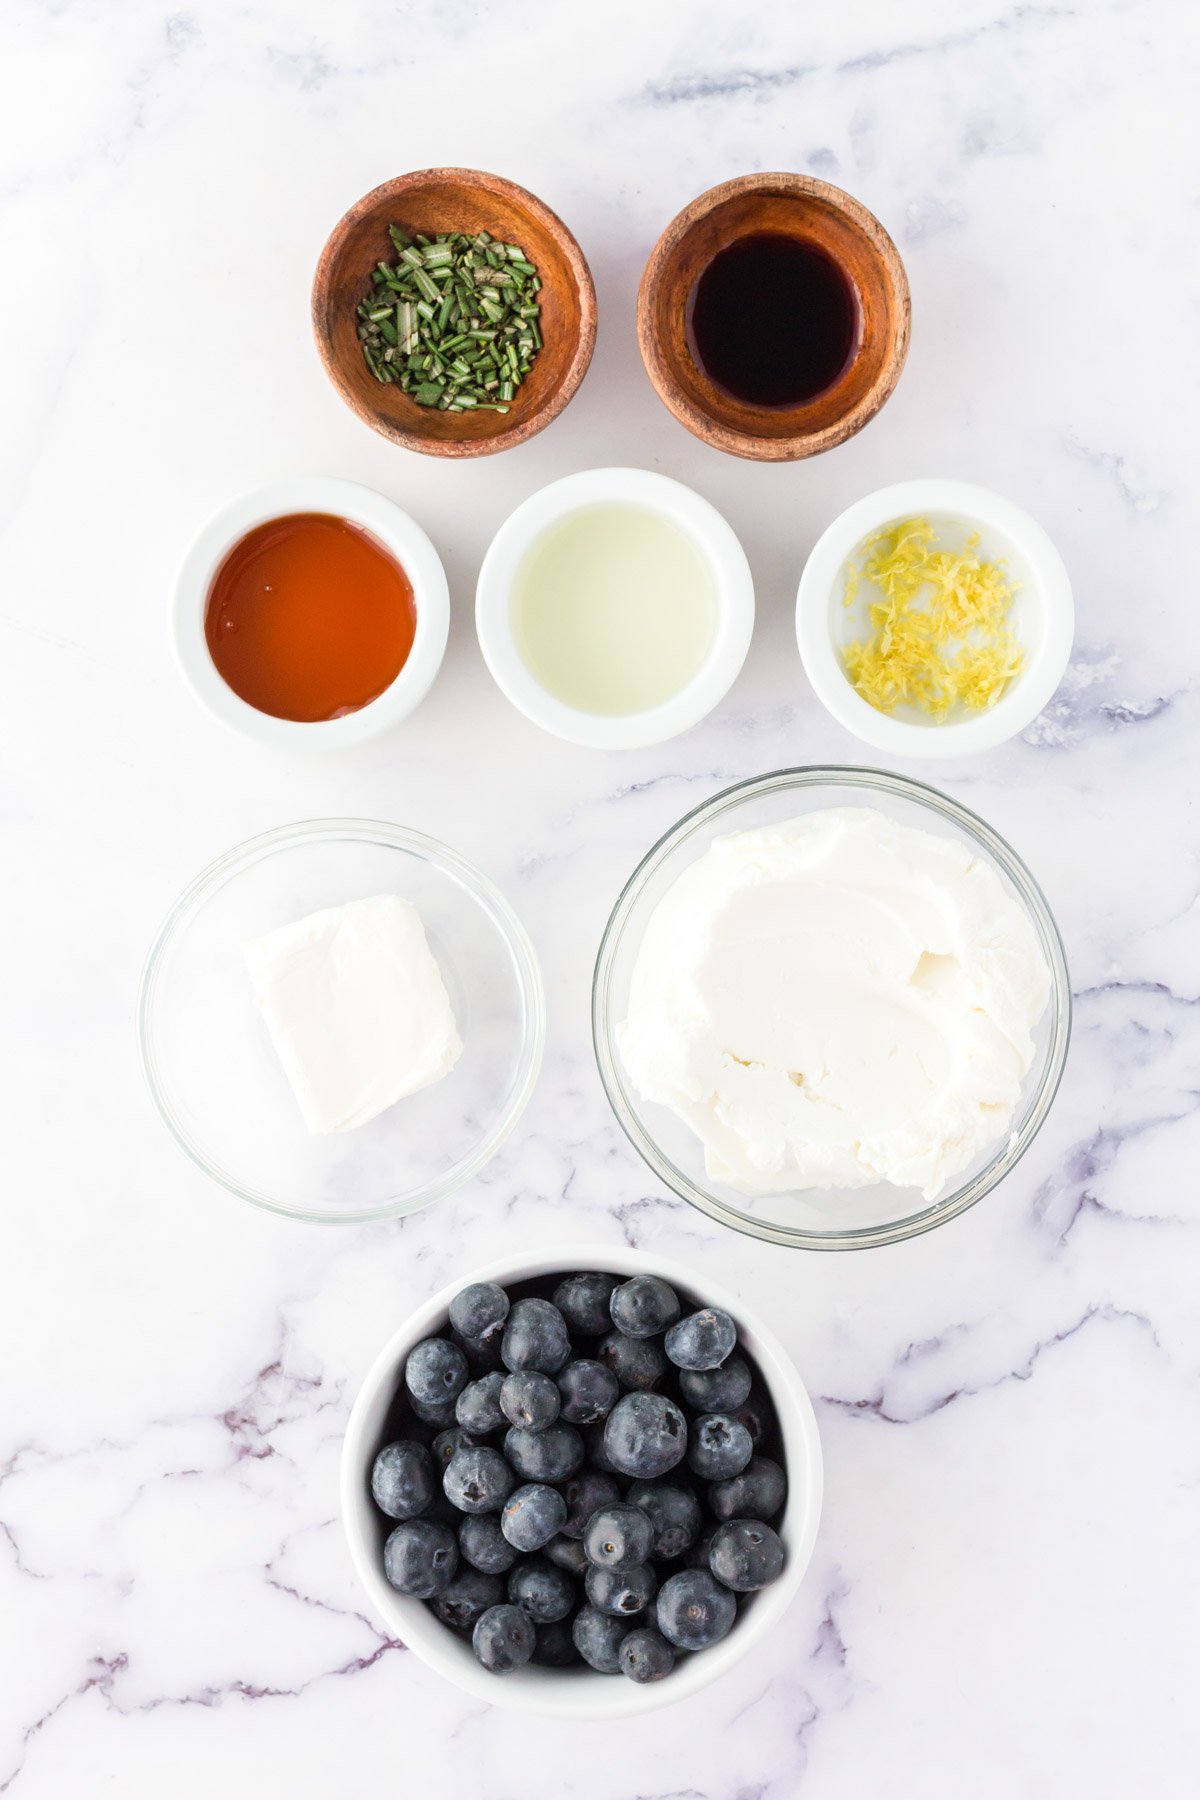 Ingredients for Blueberry Goat Cheese. 